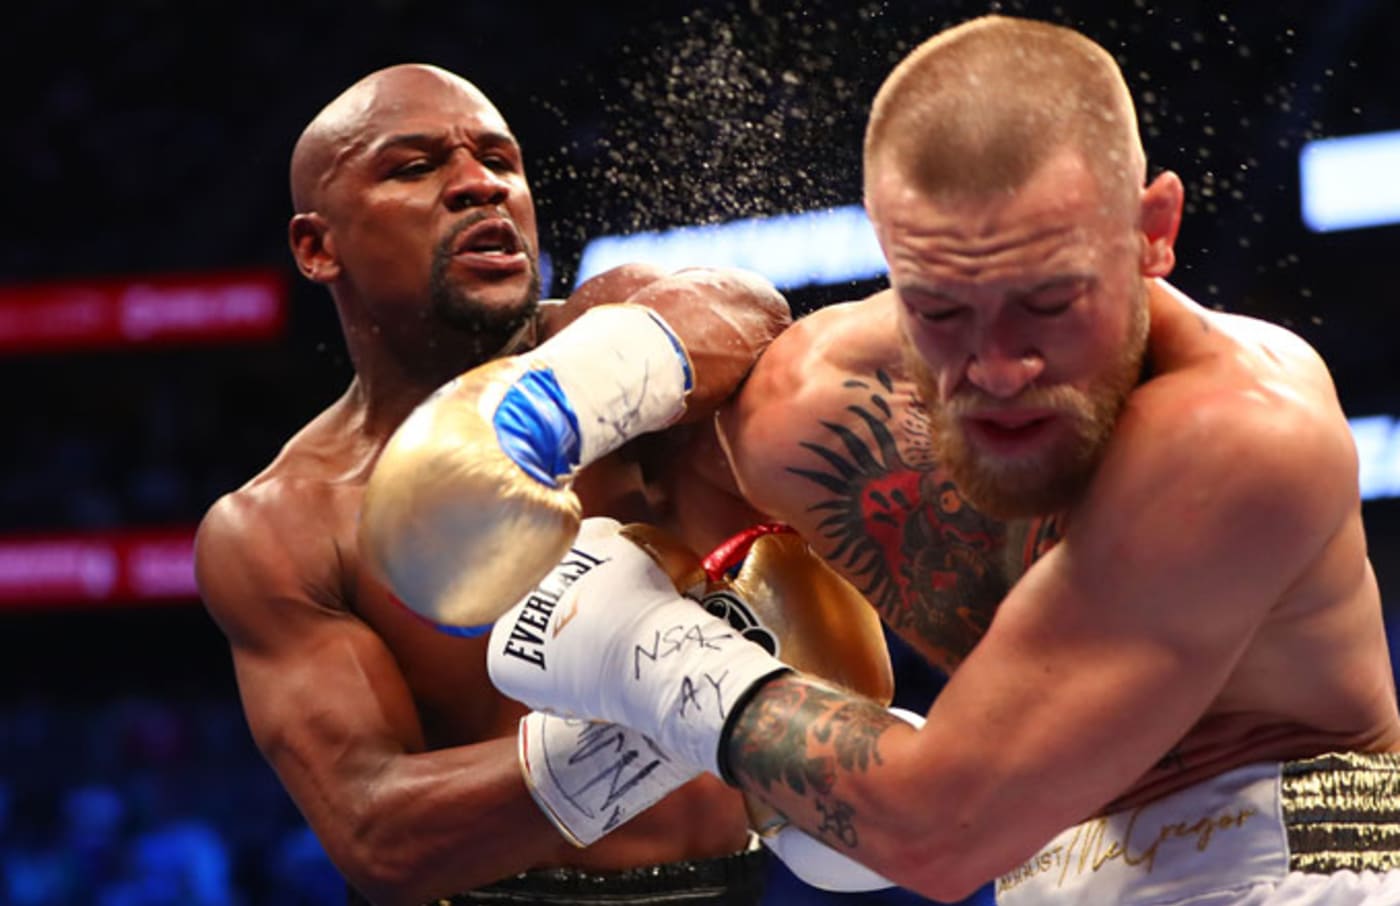 Mayweather lands a shot against Conor McGregor during their bout.